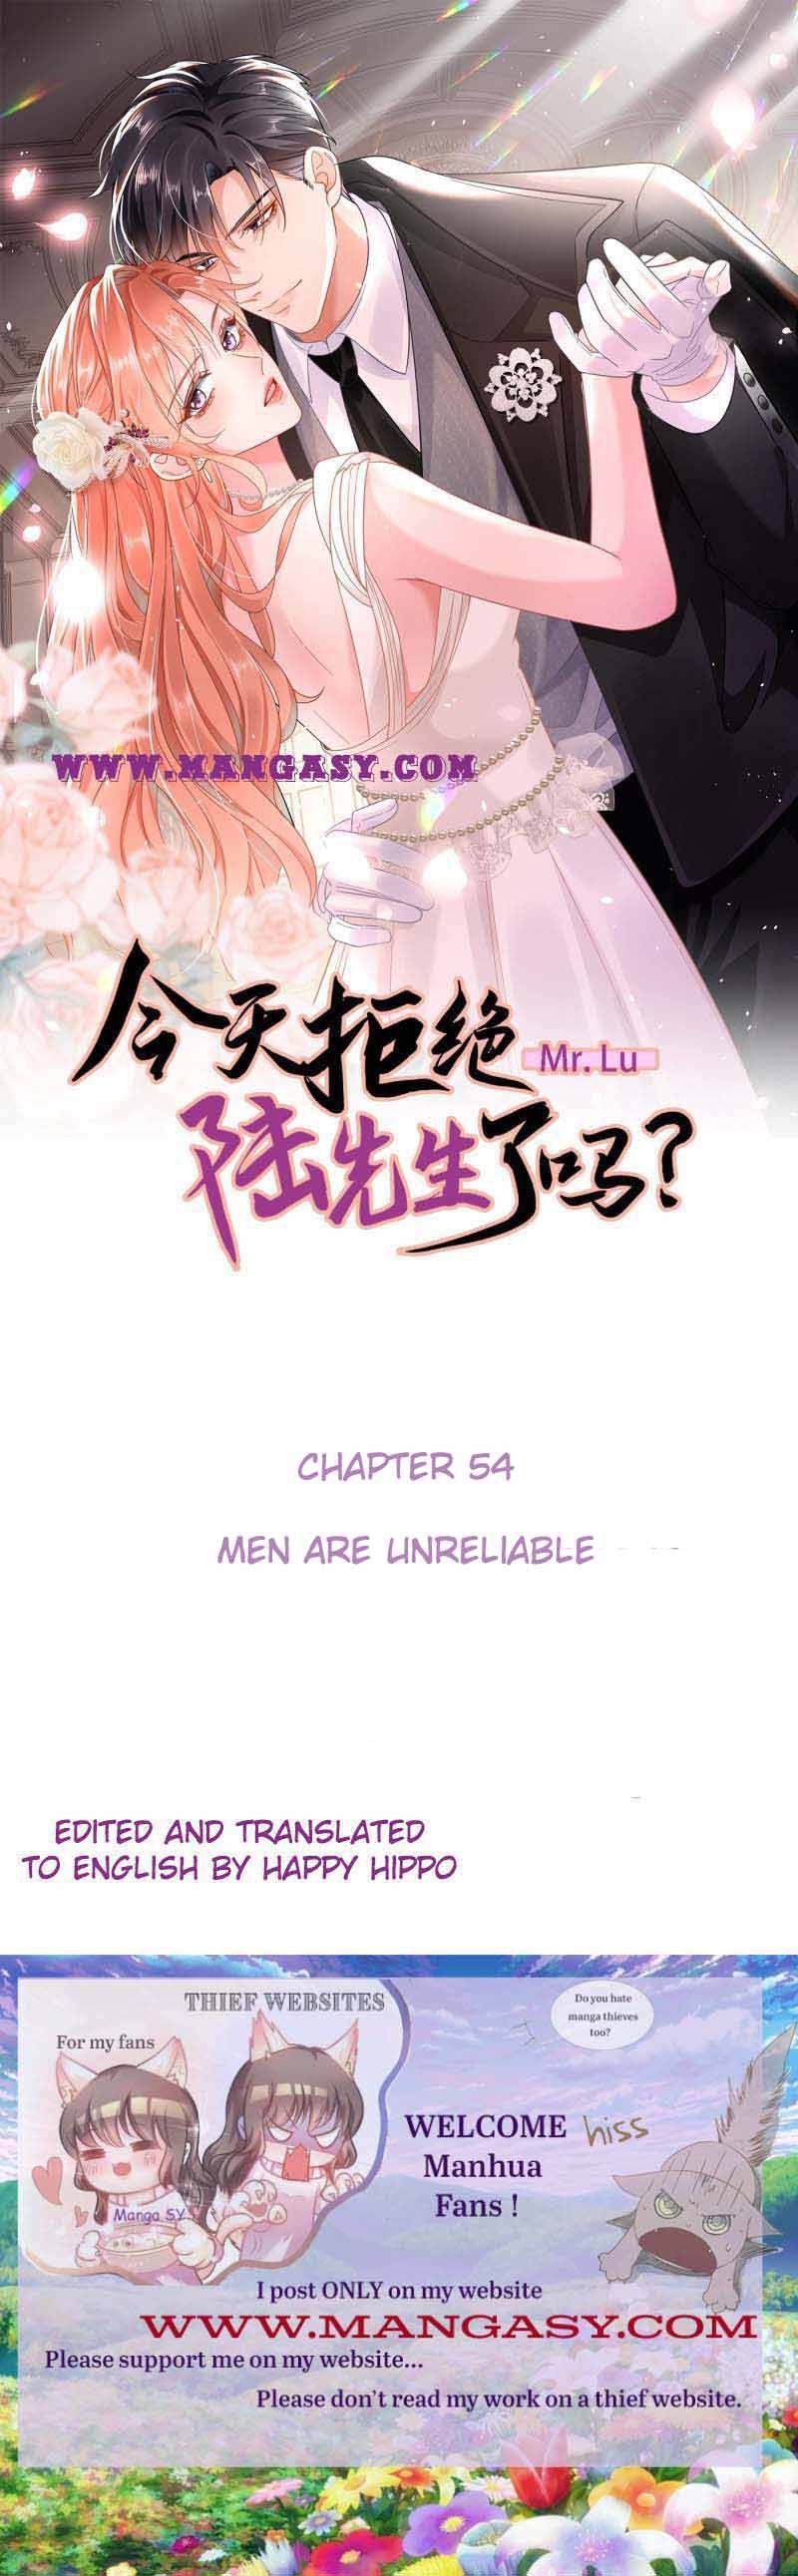 Did You Reject Mr.Lu Today? Chapter 54